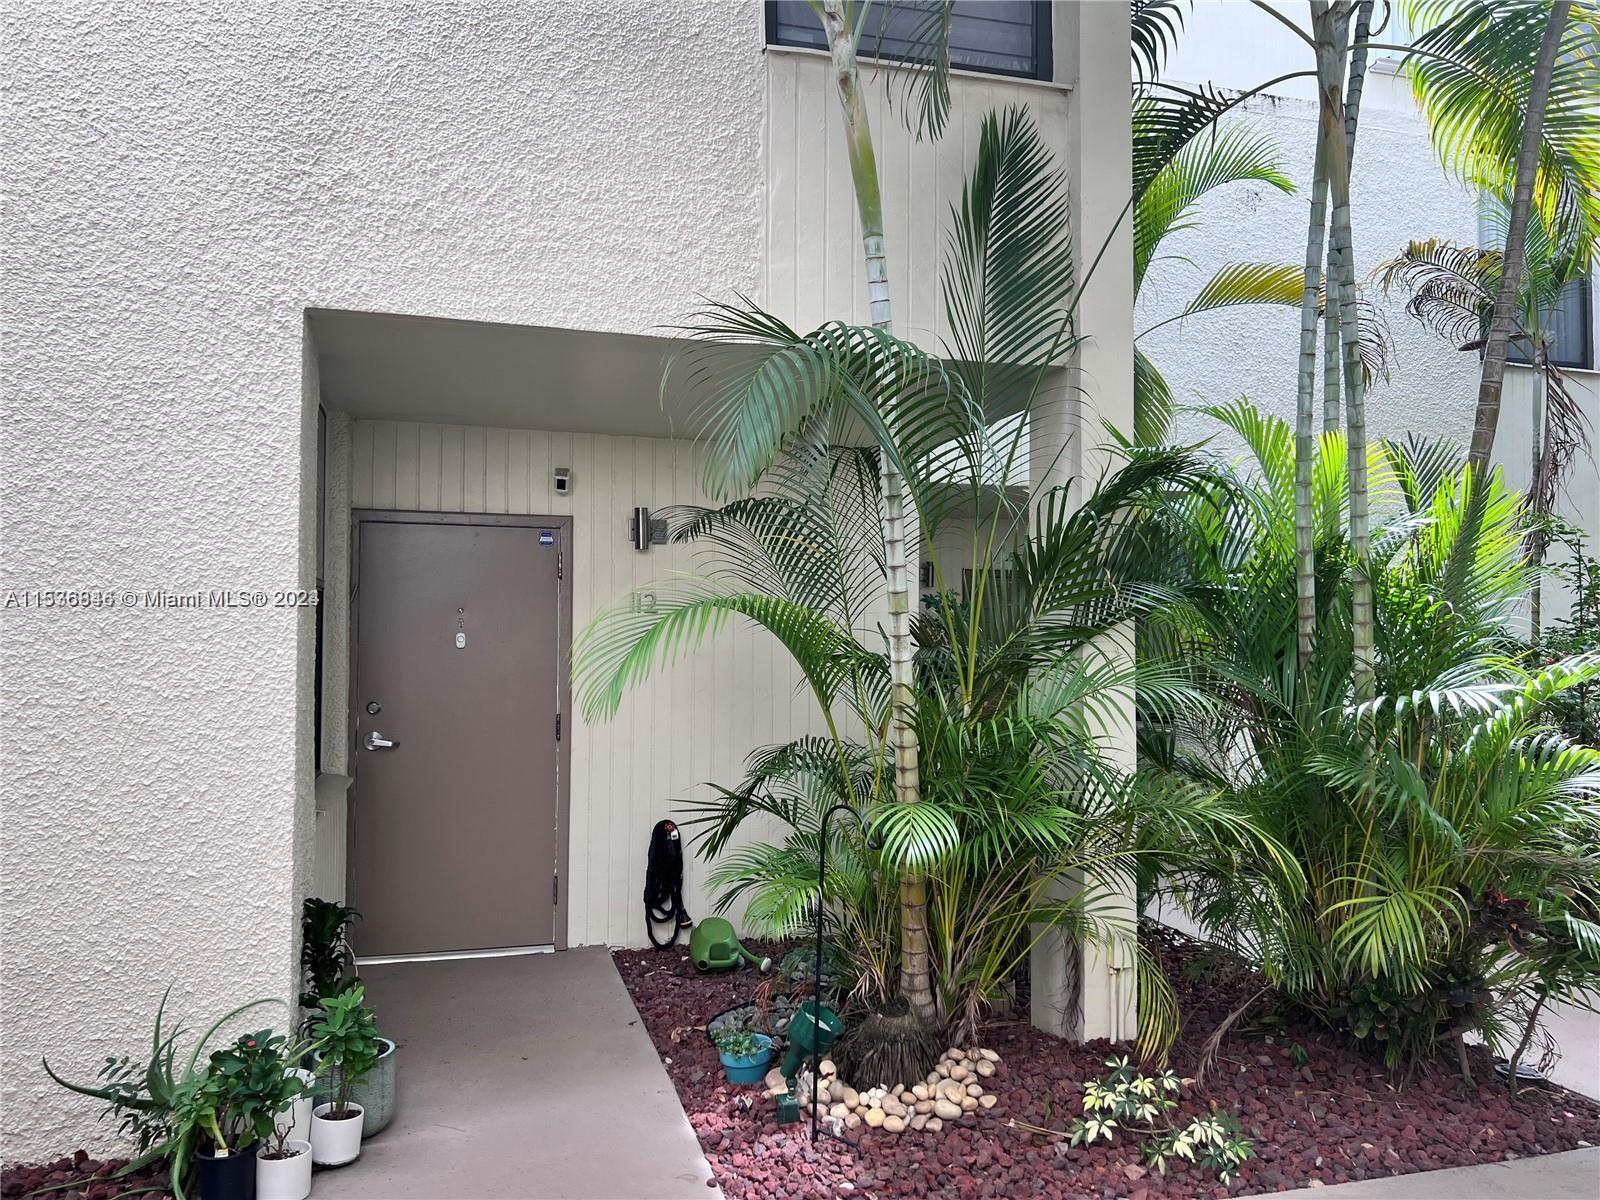 Photo of 20200 W Country Club Dr #112 in Aventura, FL